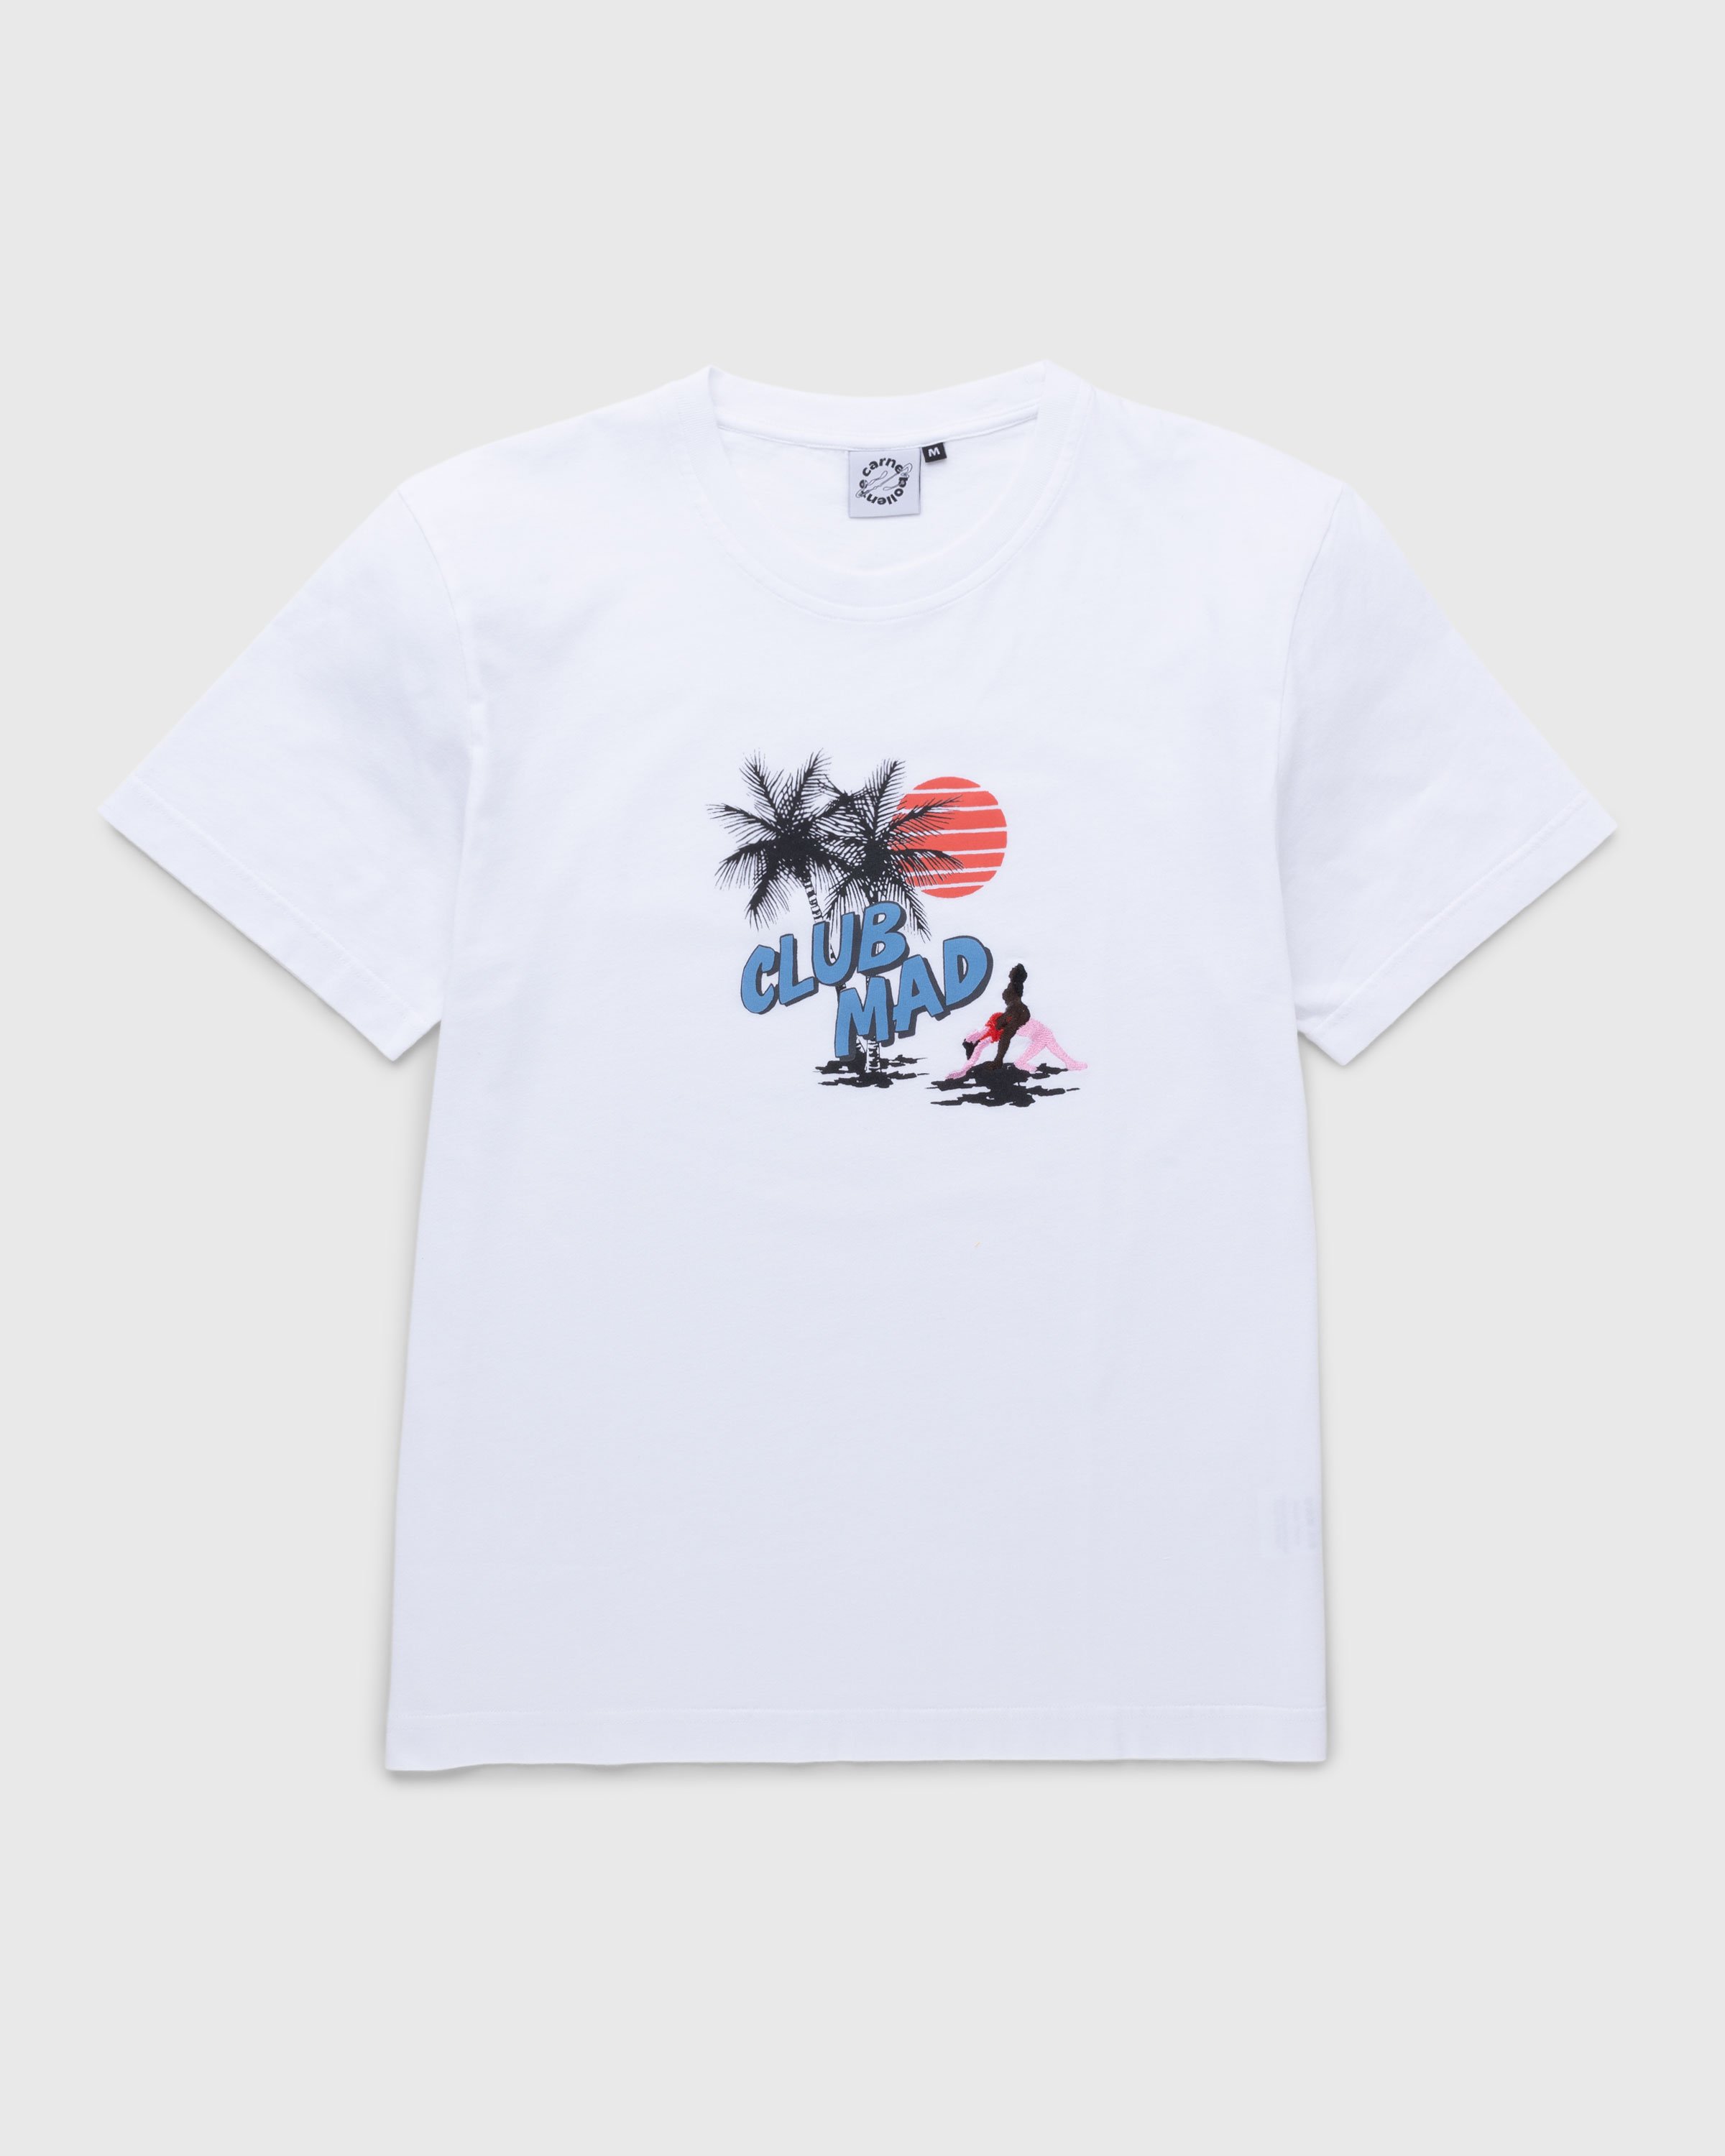 Carne Bollente - Club Mad White - Clothing - White - Image 1